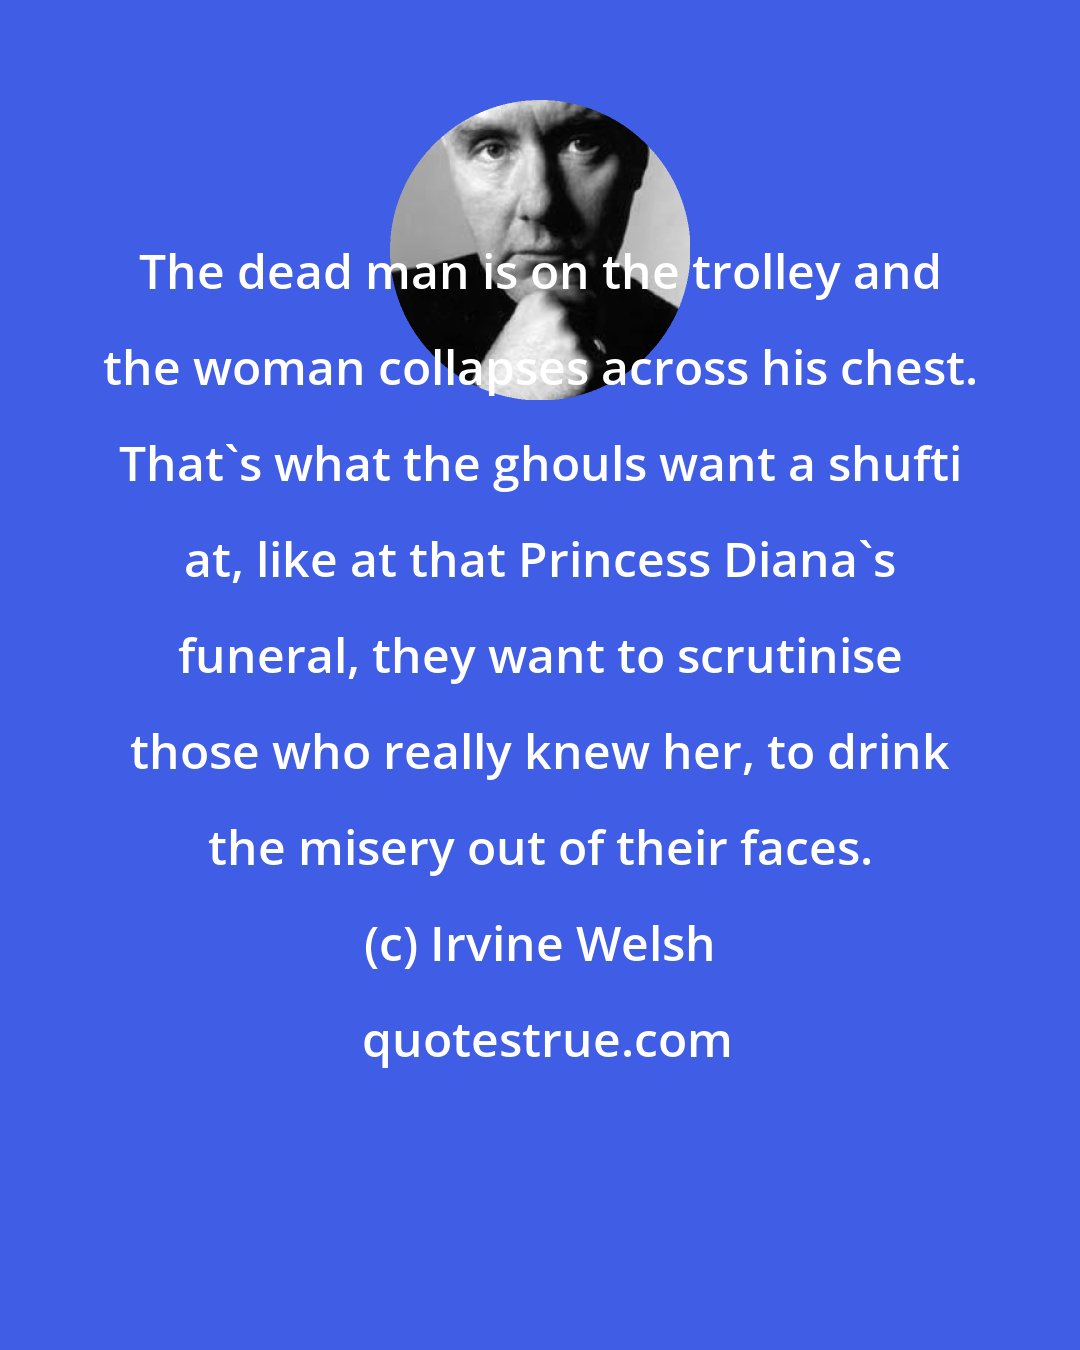 Irvine Welsh: The dead man is on the trolley and the woman collapses across his chest. That's what the ghouls want a shufti at, like at that Princess Diana's funeral, they want to scrutinise those who really knew her, to drink the misery out of their faces.